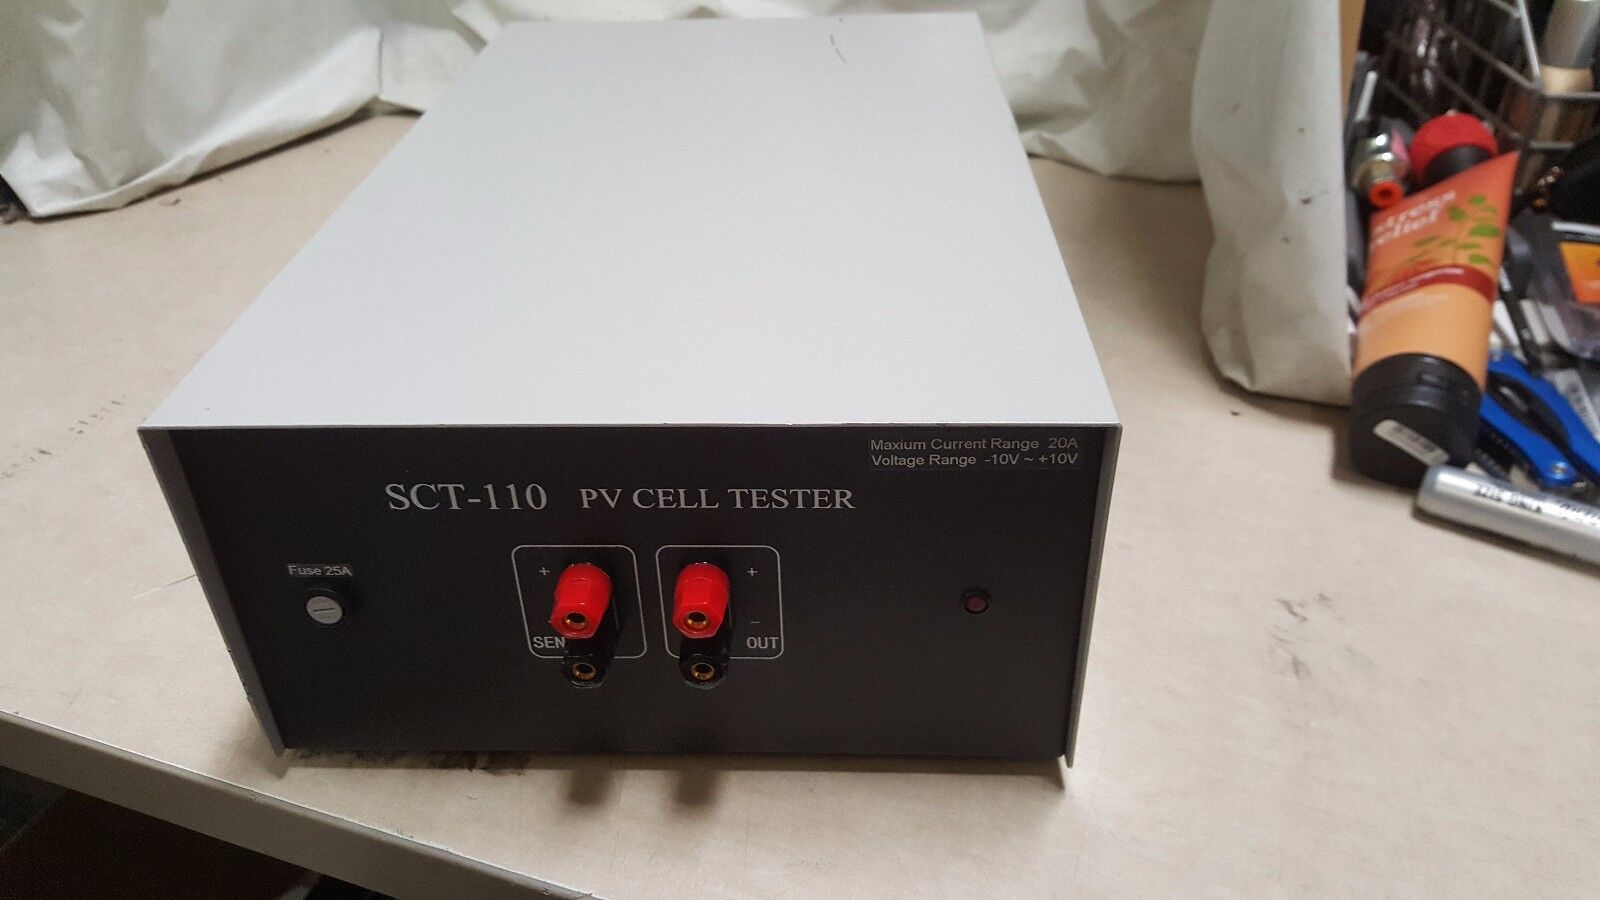 sct-110 pv cell tester 20a -10v + 10v Photovoltaic testing system new out of box